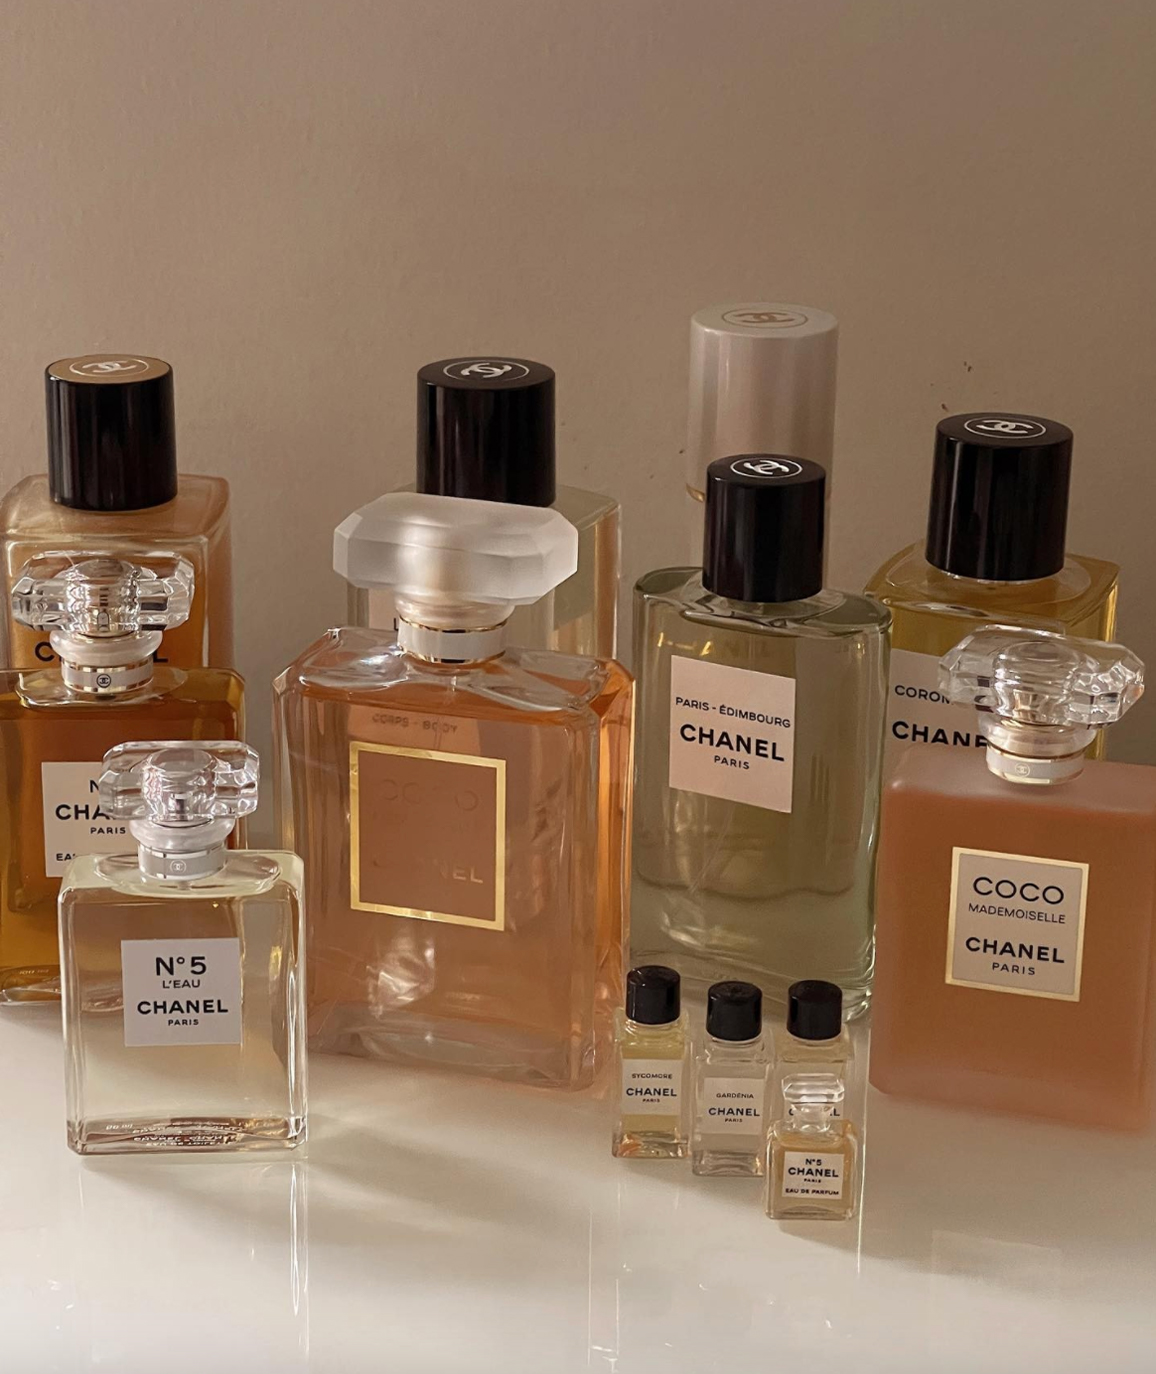 How to Buy Perfume Online, According to an Expert